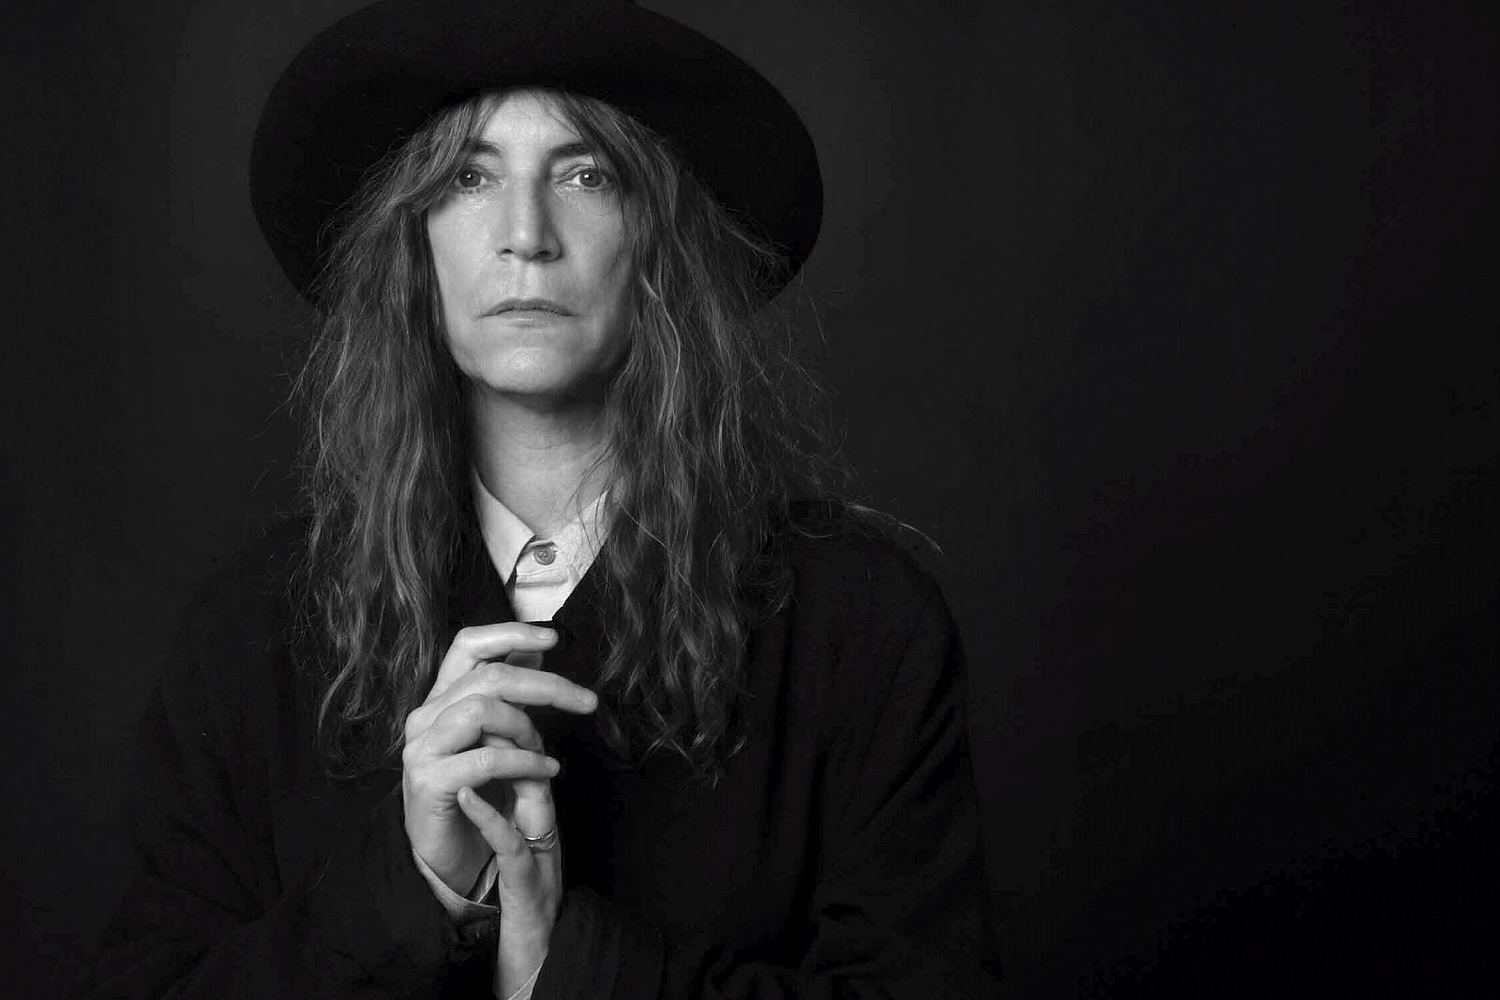 Patti Smith and U2 perform together in Paris